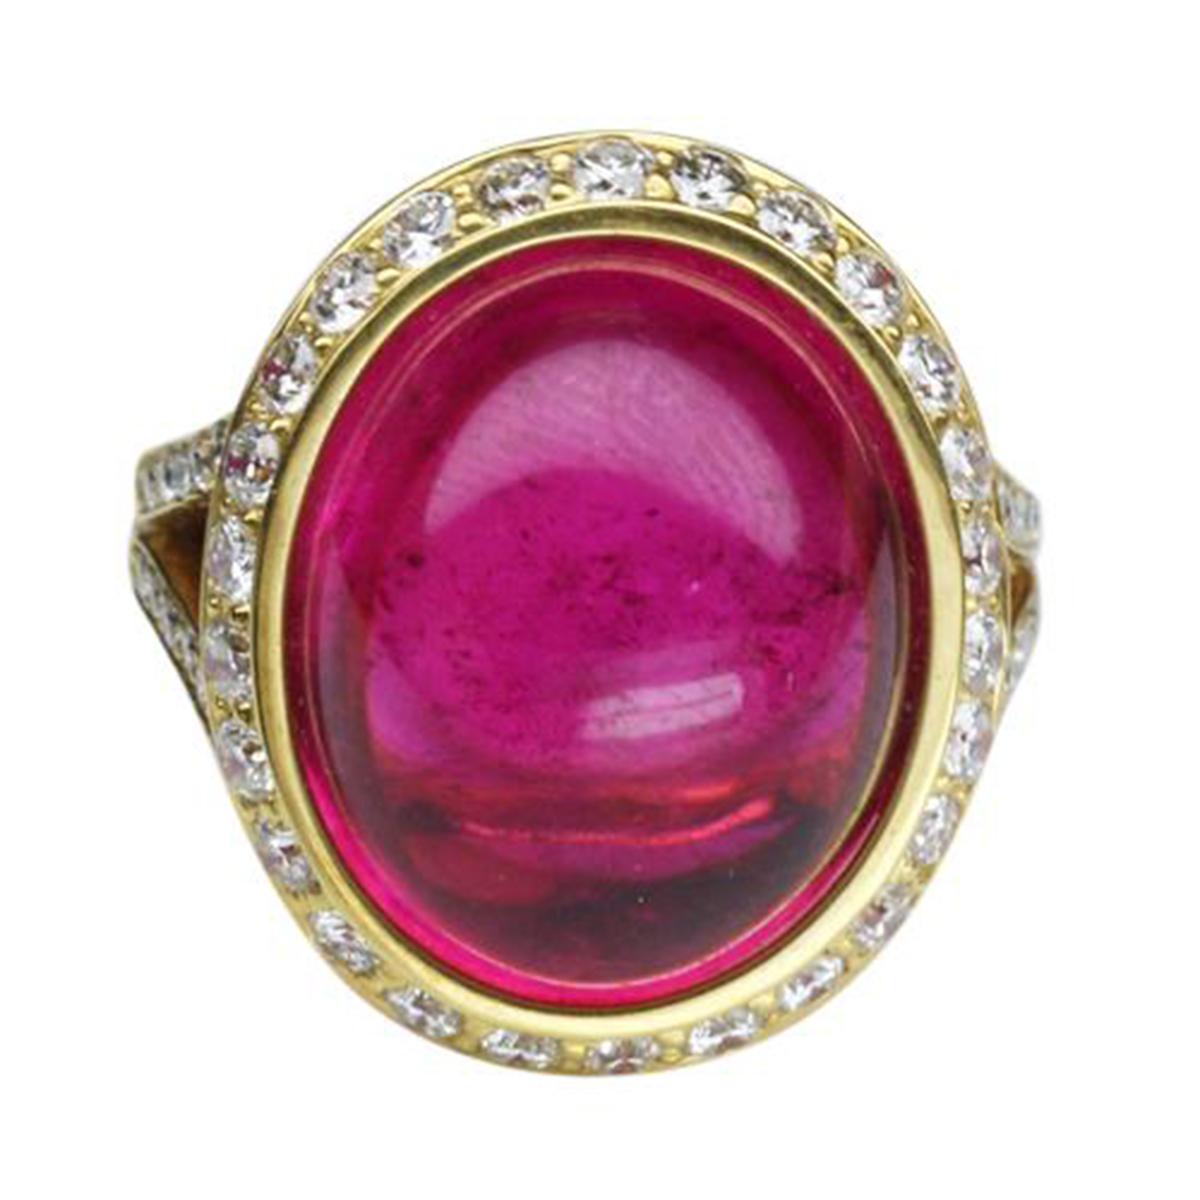 Elegant & finely detailed Gold Ring, center set with a securely nestled 19.06 Carat Oval Intense Red Rubelite, measuring approx. 16.5mm x 13.0mm; clarity VS; heat treatment; surrounded by and enhanced on shank with micro-set Brilliant full cut